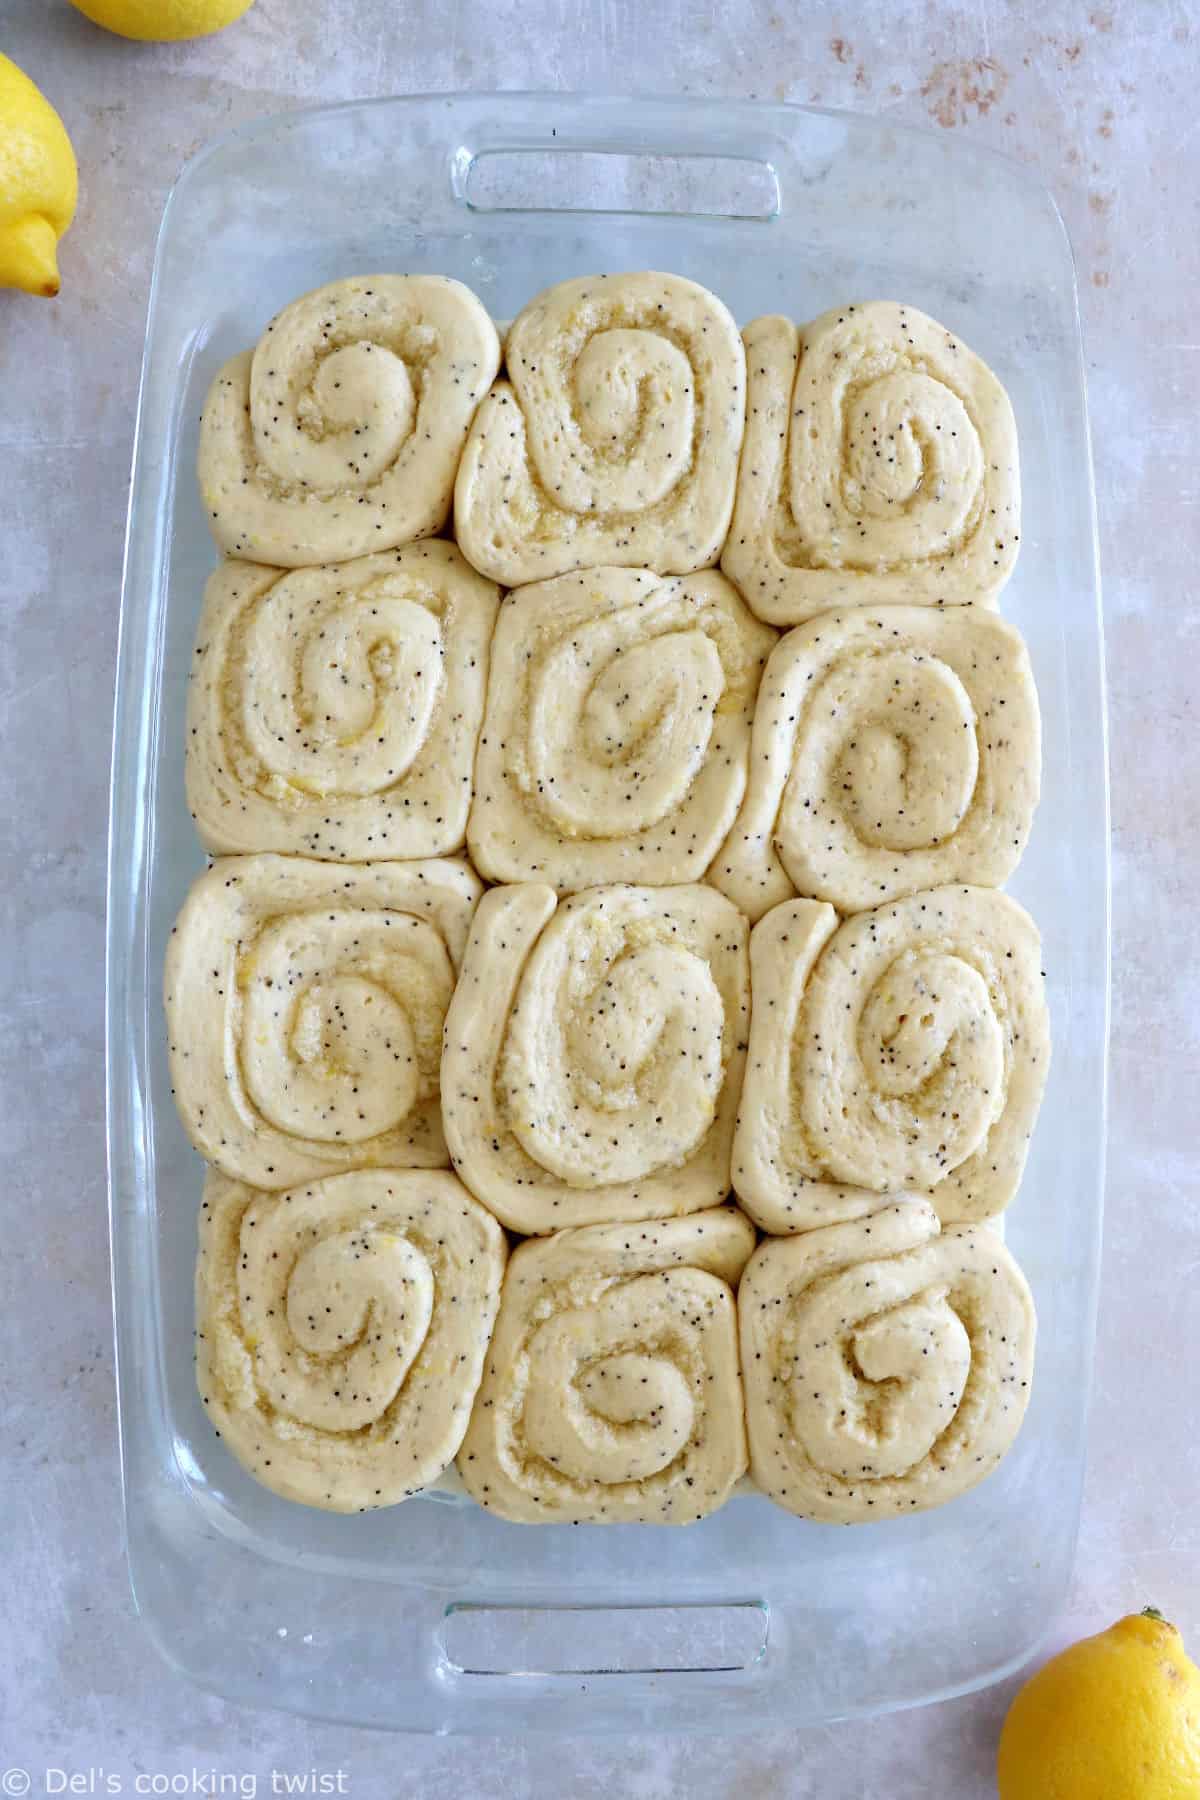 Lemon poppy seed sweet rolls are incredibly soft and fluffy, loaded with lemony flavors, and topped with an ooey-gooey cream cheese frosting.